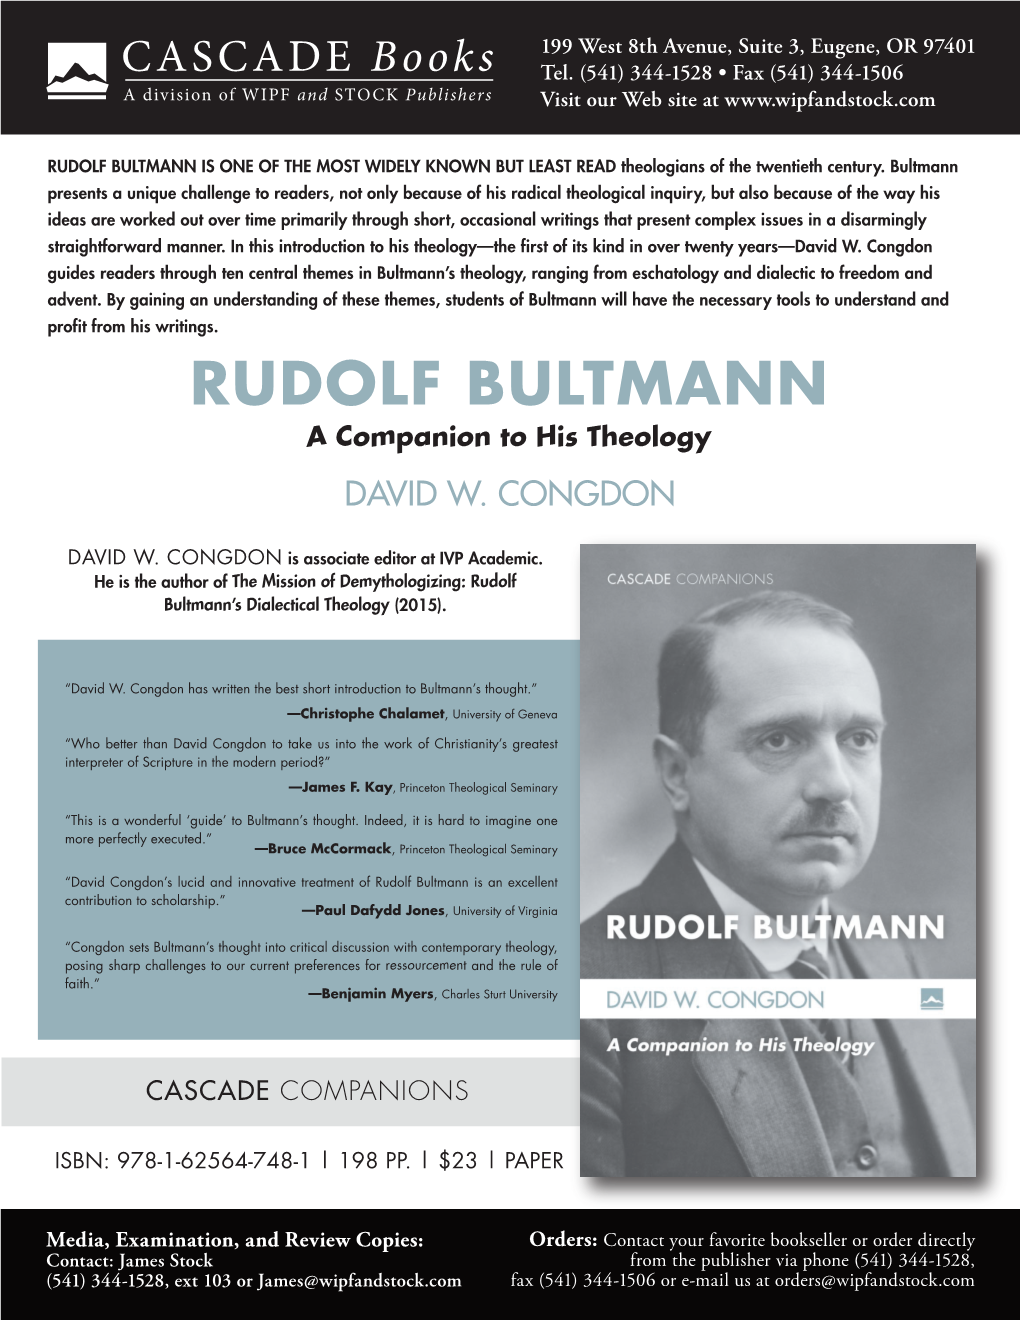 RUDOLF BULTMANN IS ONE of the MOST WIDELY KNOWN but LEAST READ Theologians of the Twentieth Century